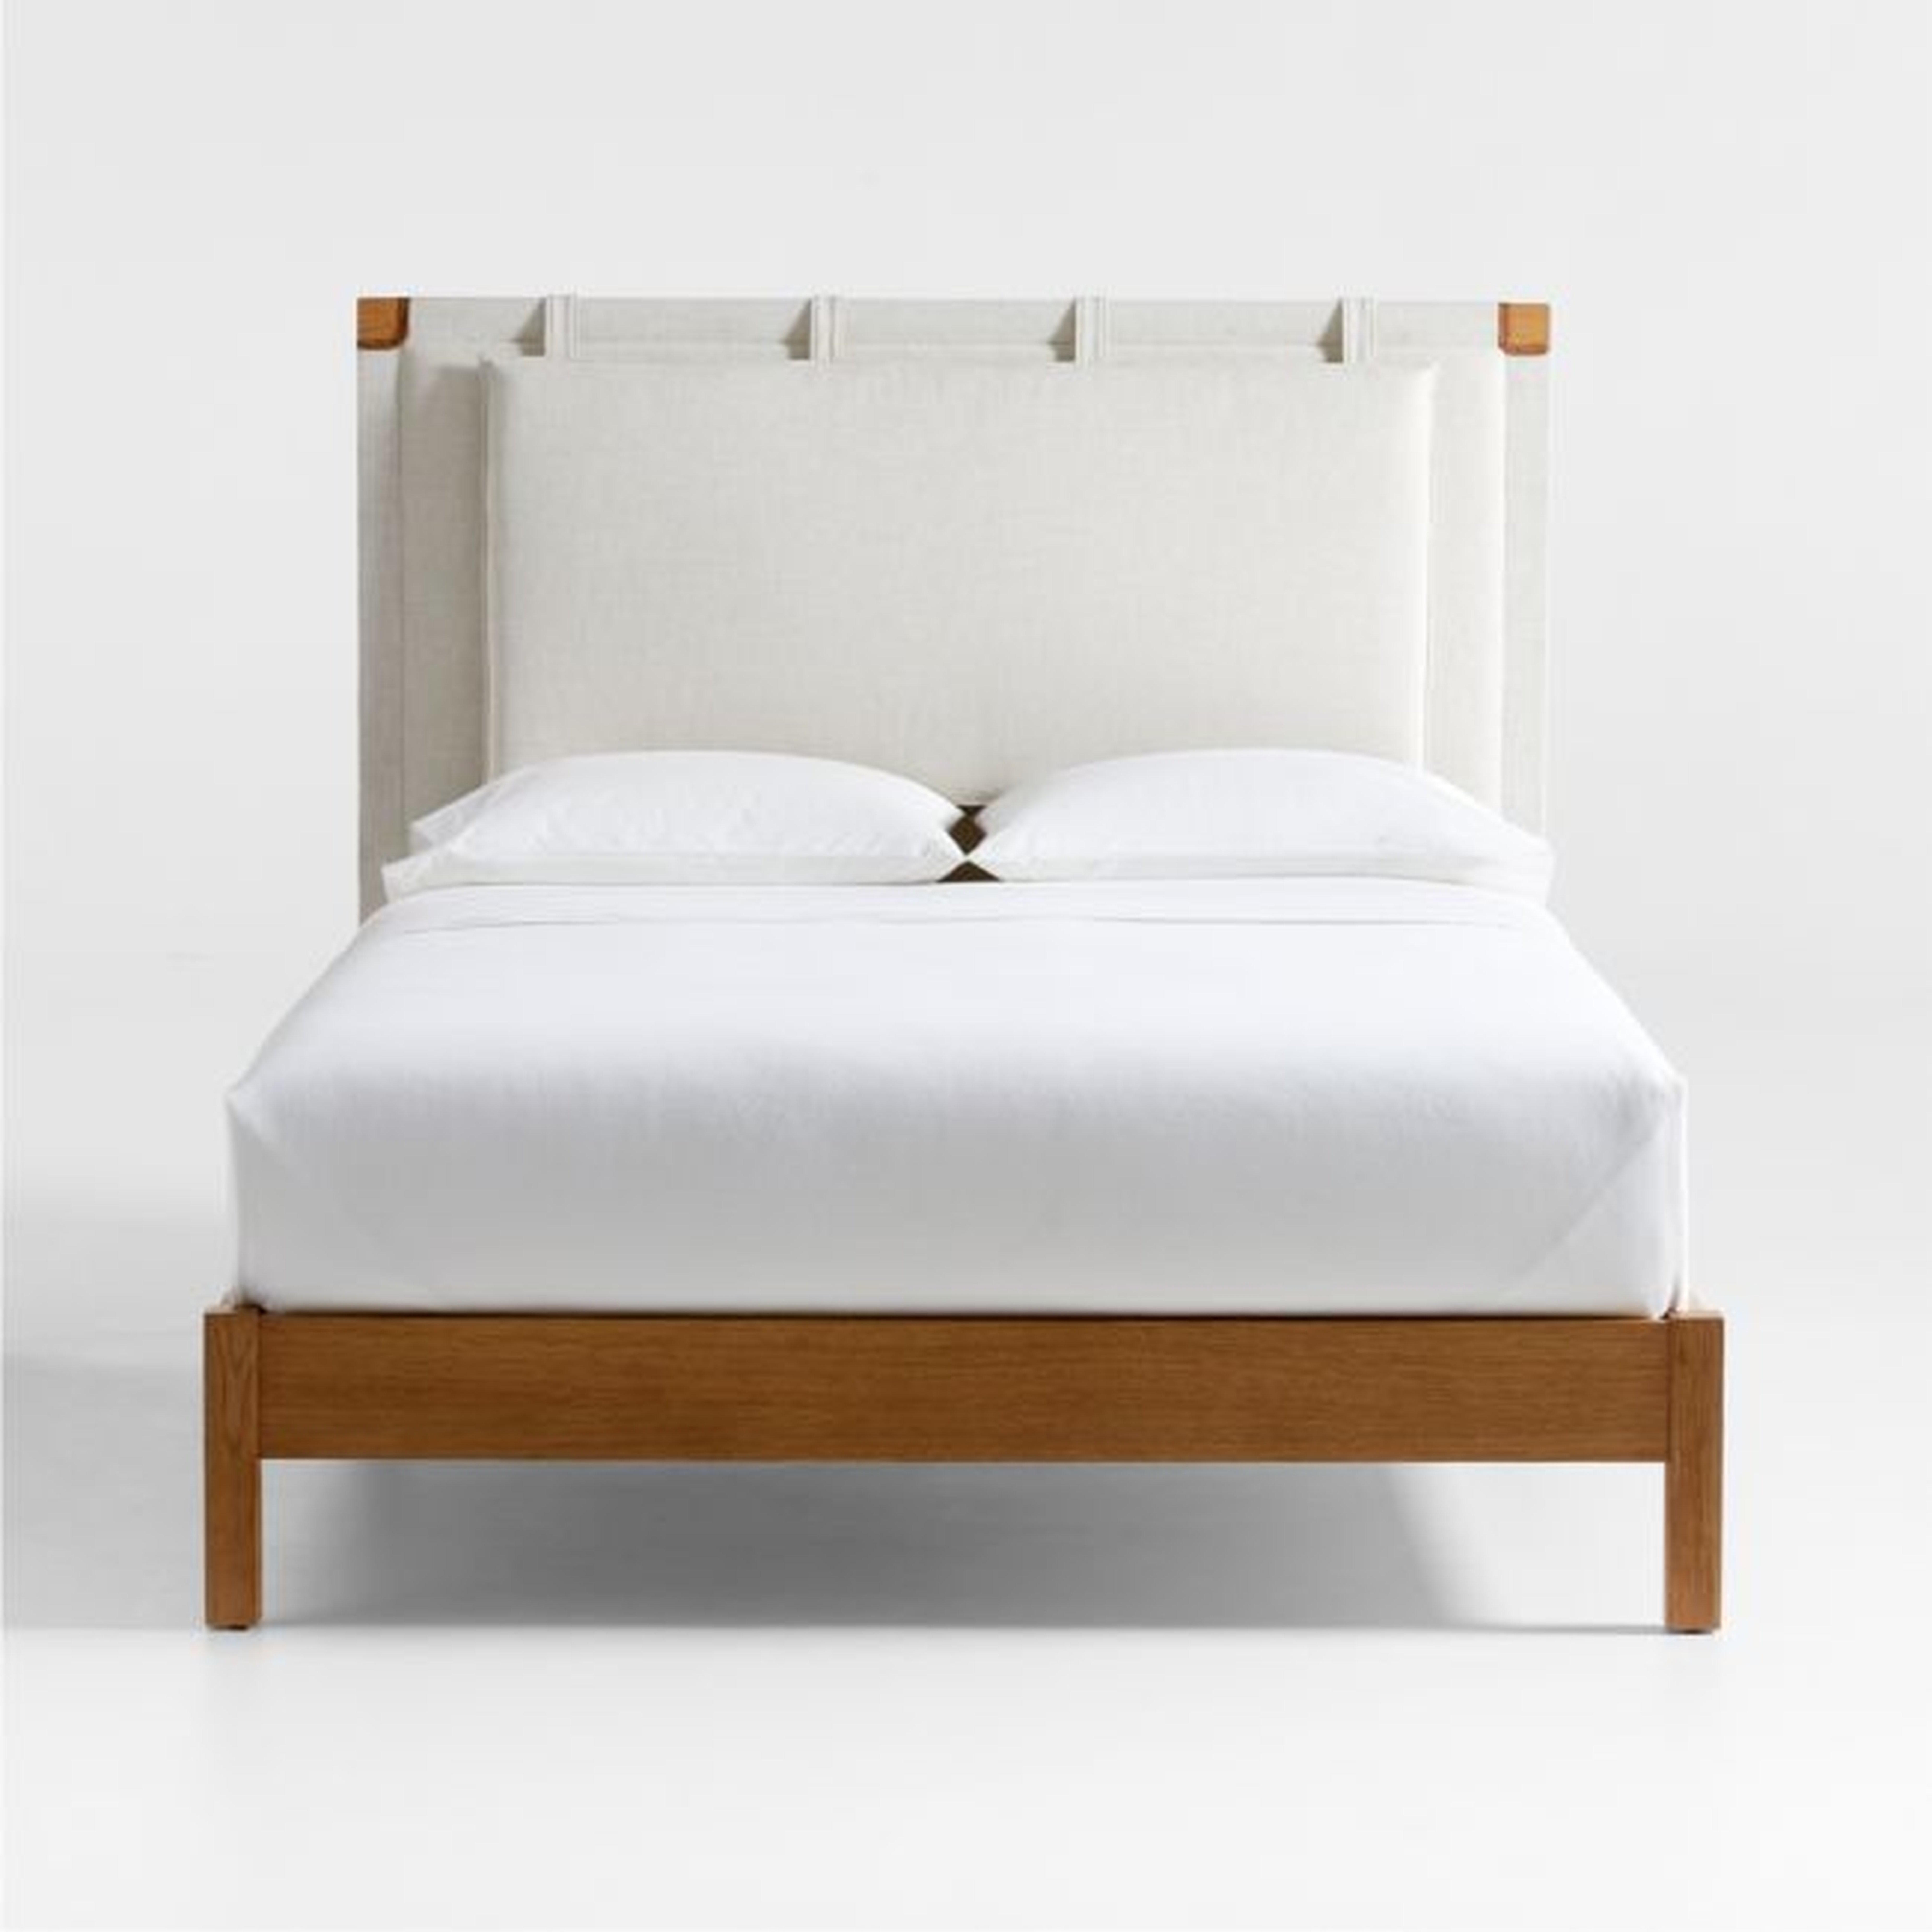 Shinola Hotel Queen Bed with Headboard Cushion - Crate and Barrel